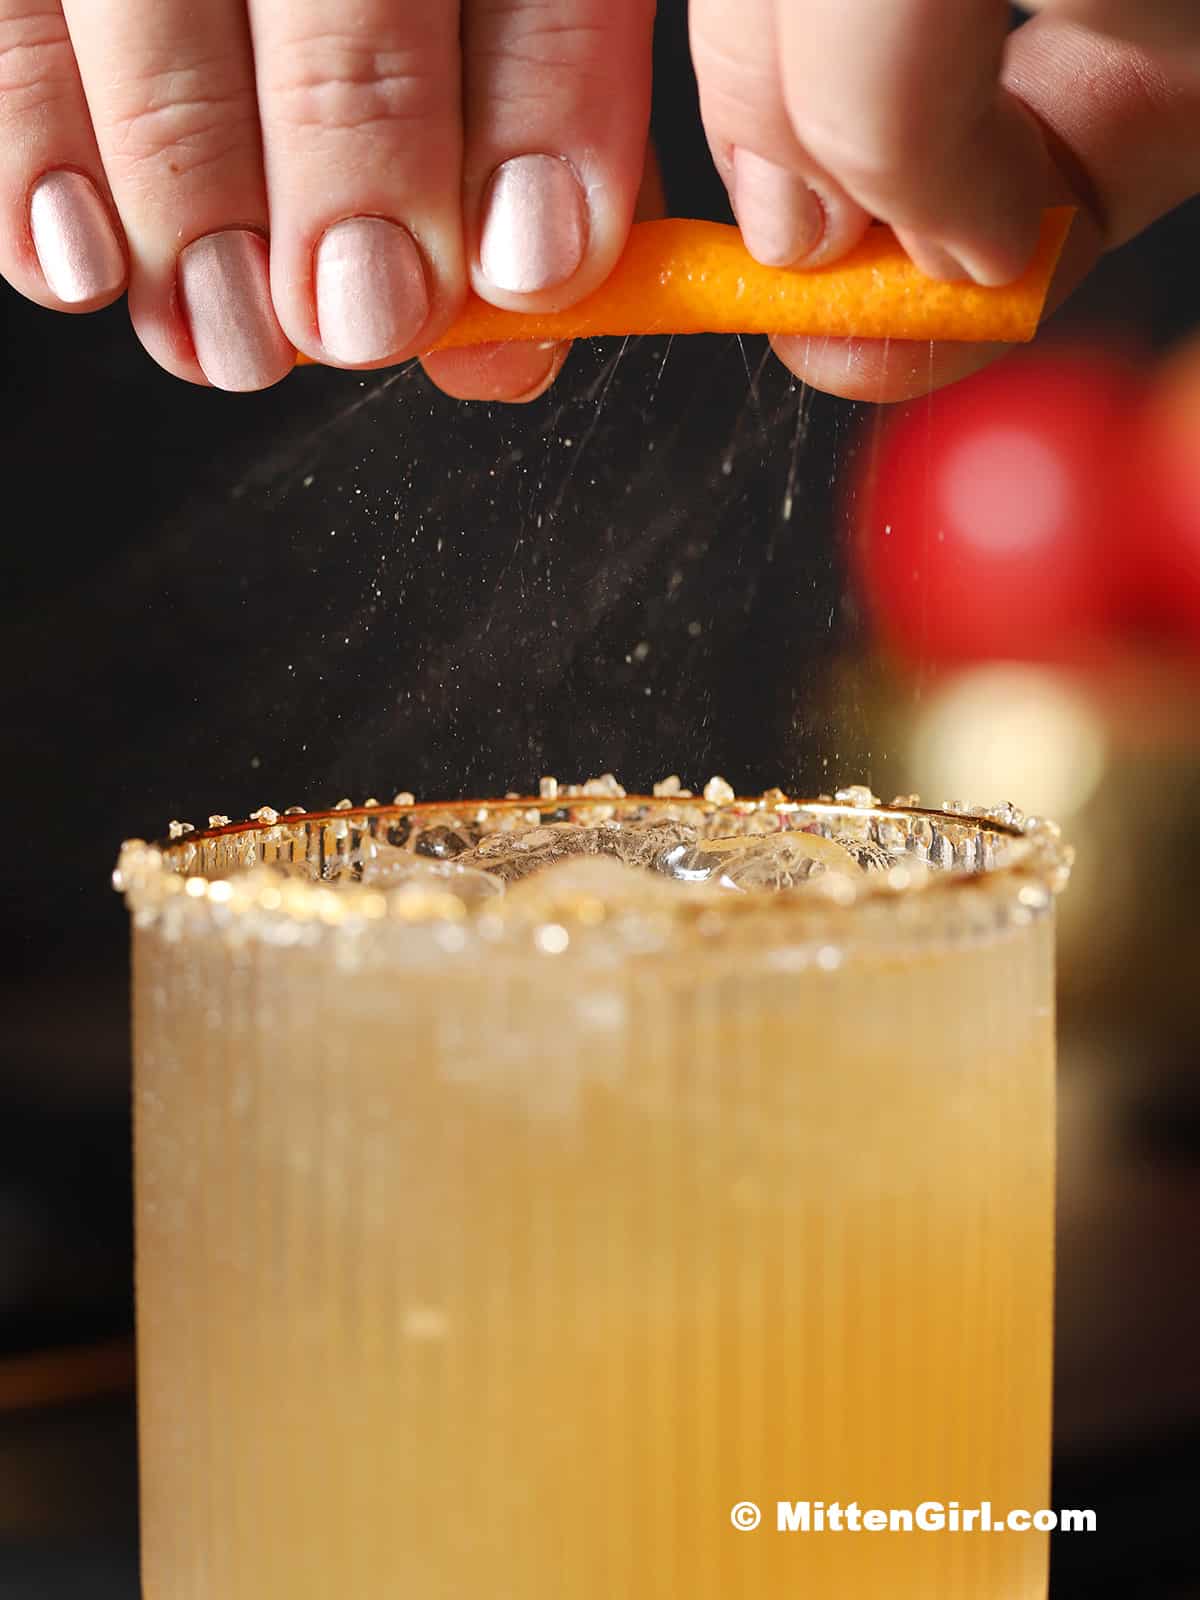 An orange peel being squeezed over a glass of apple mocktail.